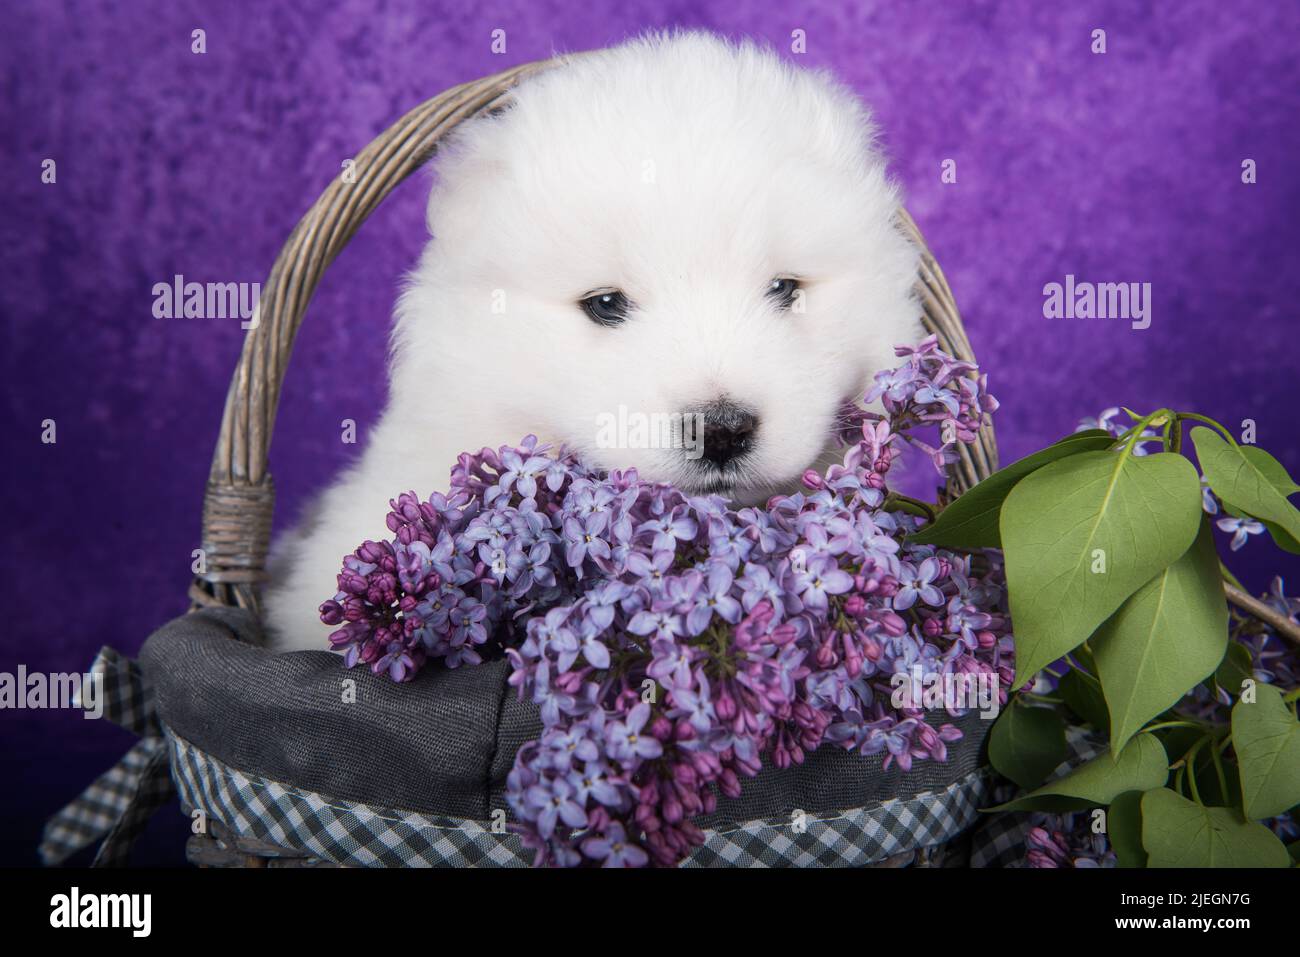 White fluffy small Samoyed puppy dog is sitting on purple background with lilac flowers in basket Stock Photo